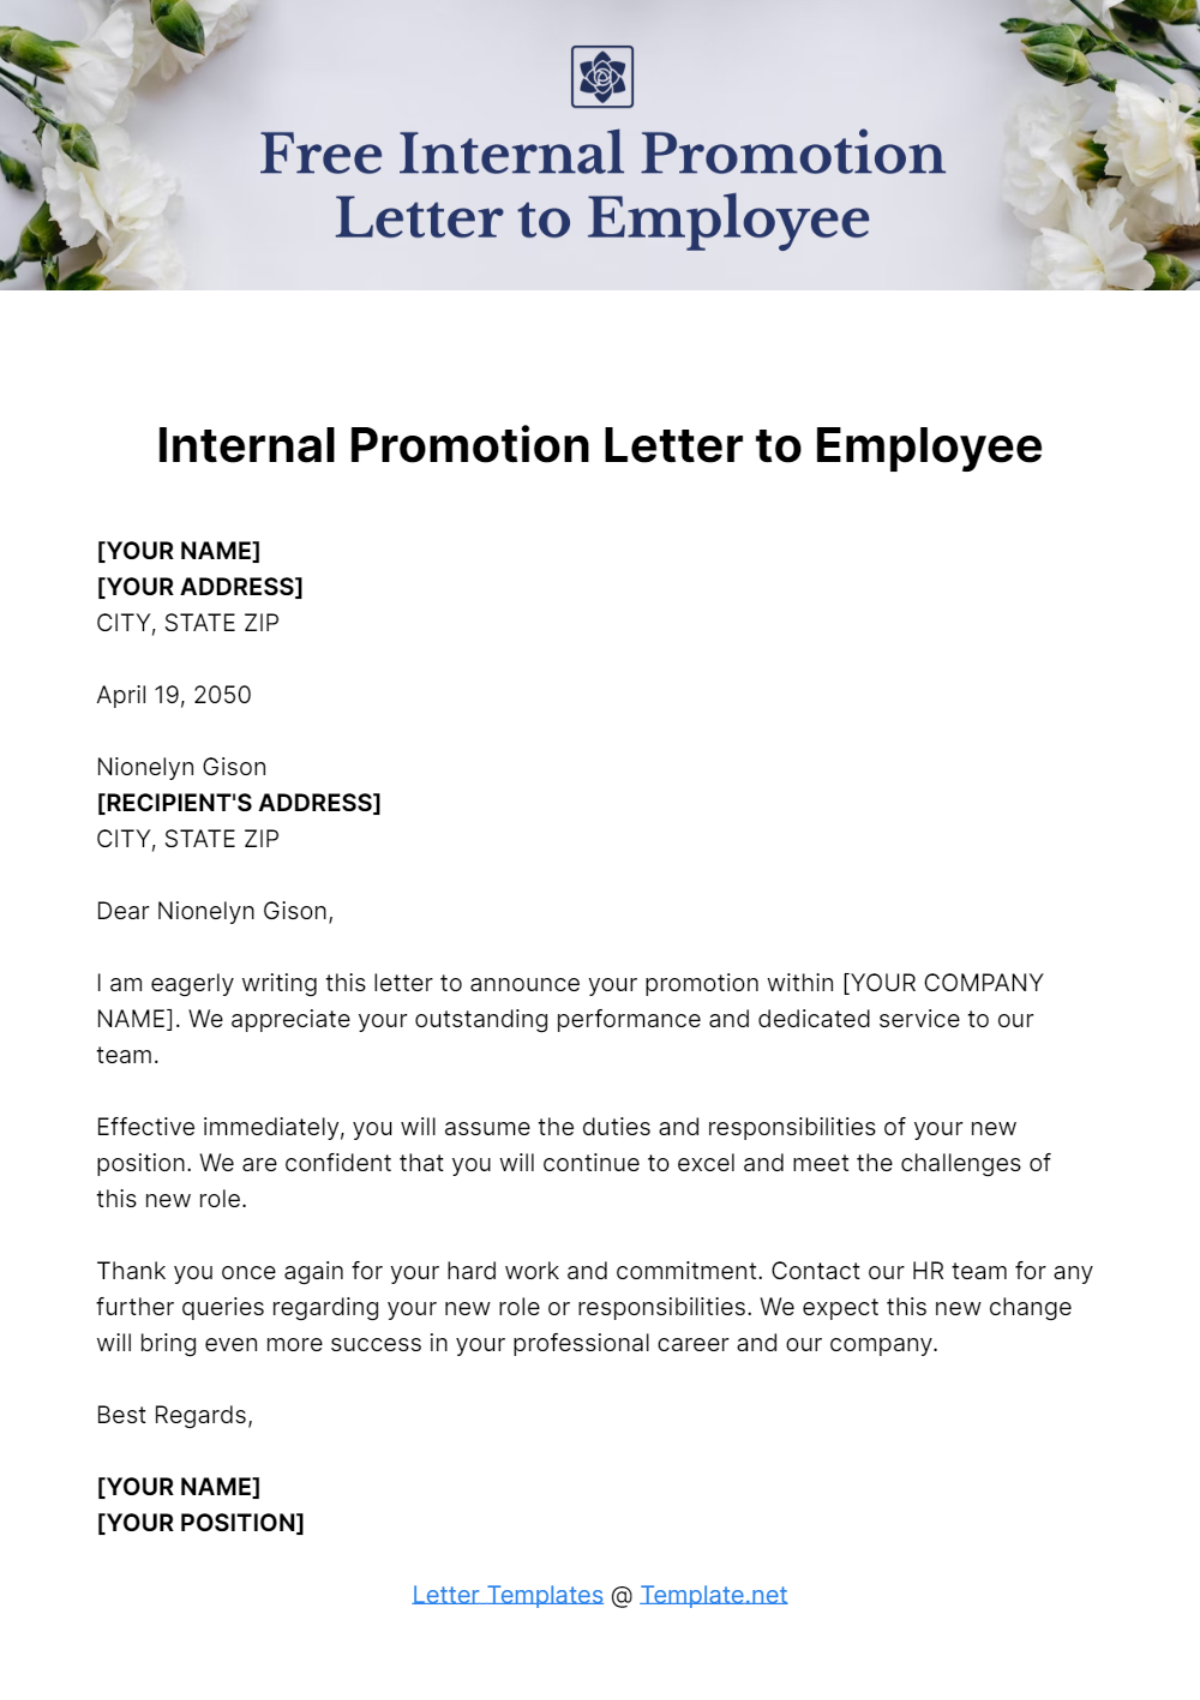 Free Internal Promotion Letter to Employee Template